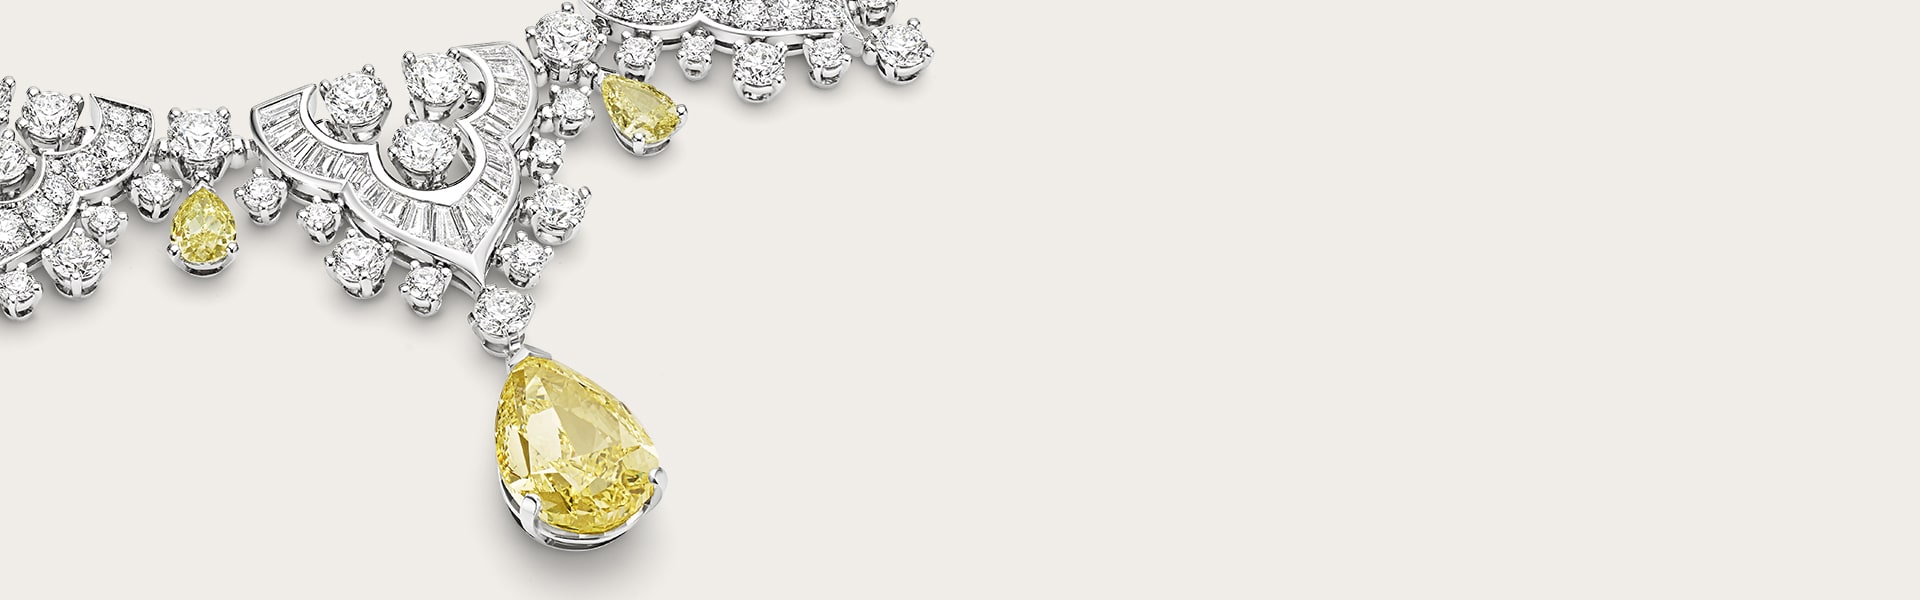 Tribute to Venice Mediterranea High Jewelry necklace with white and yellow diamonds, close-up.